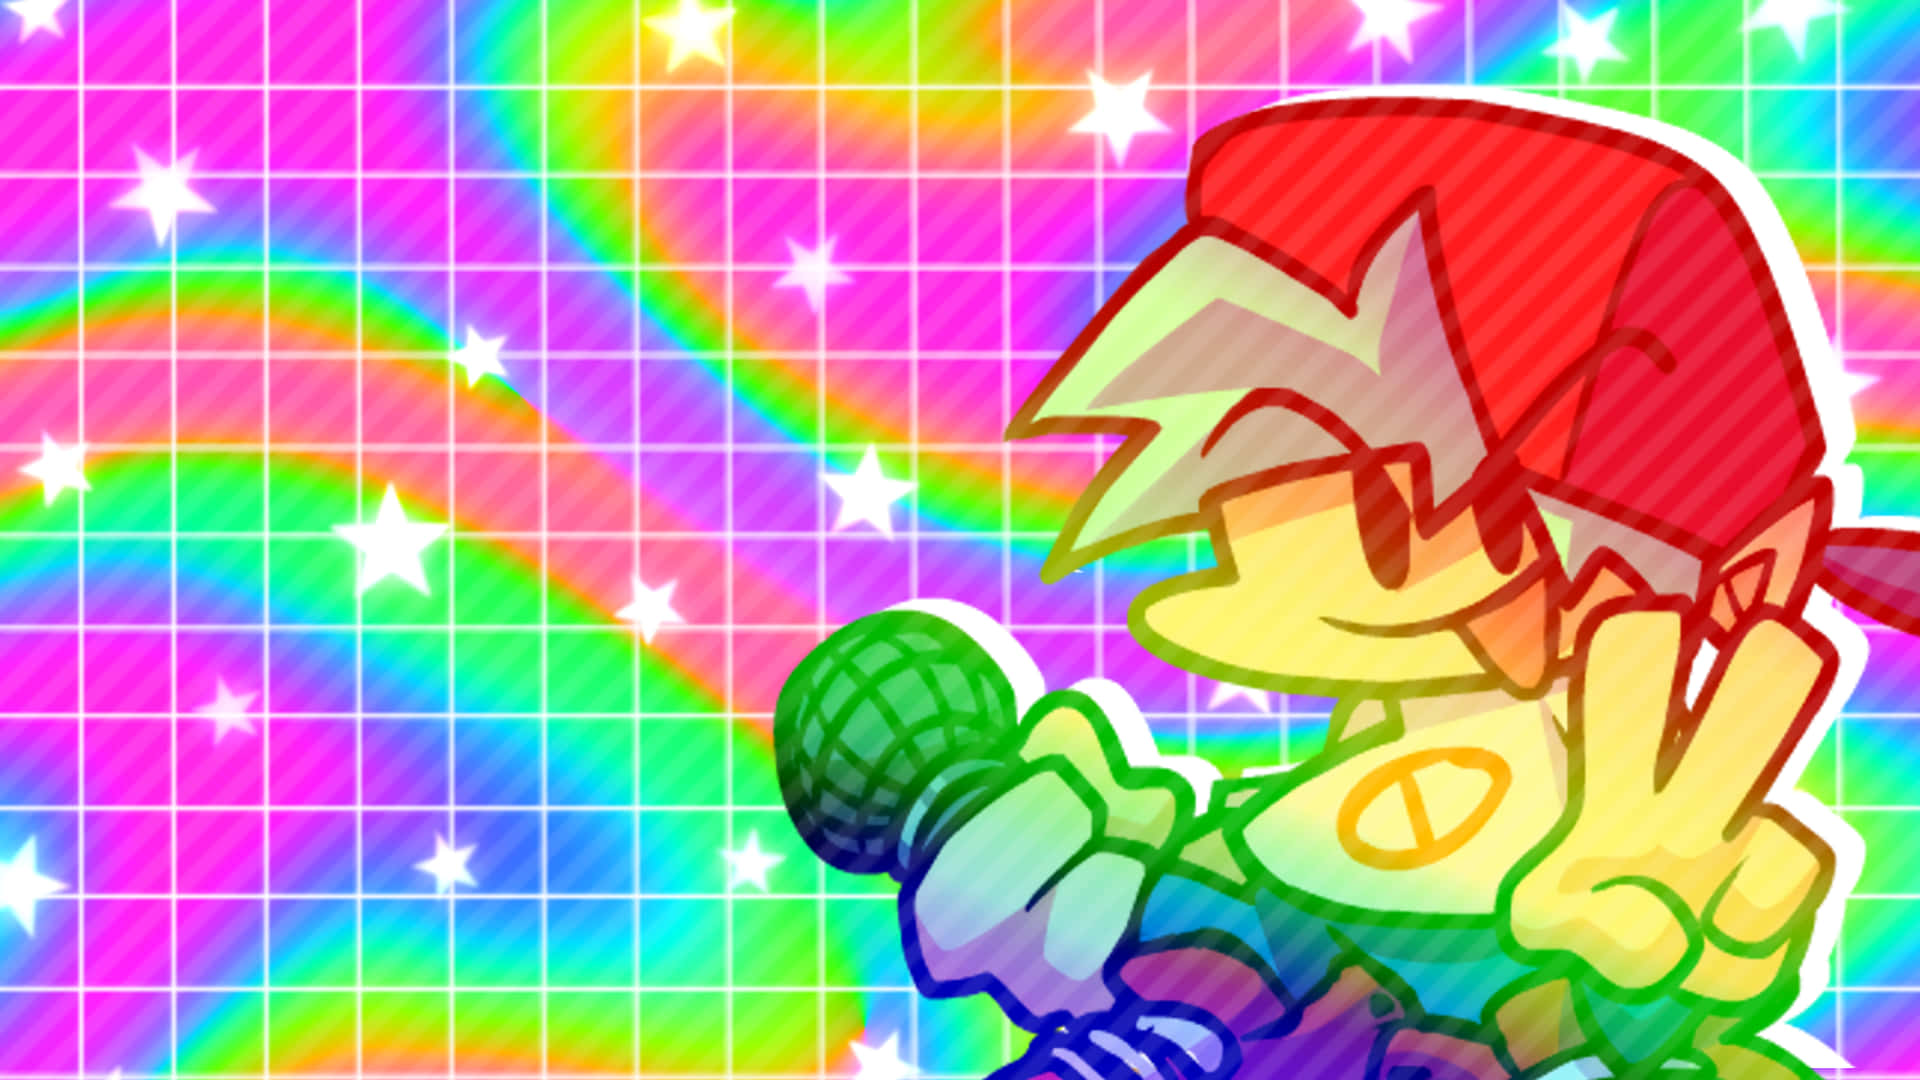 A Cartoon Character With A Red Hat And A Rainbow Background